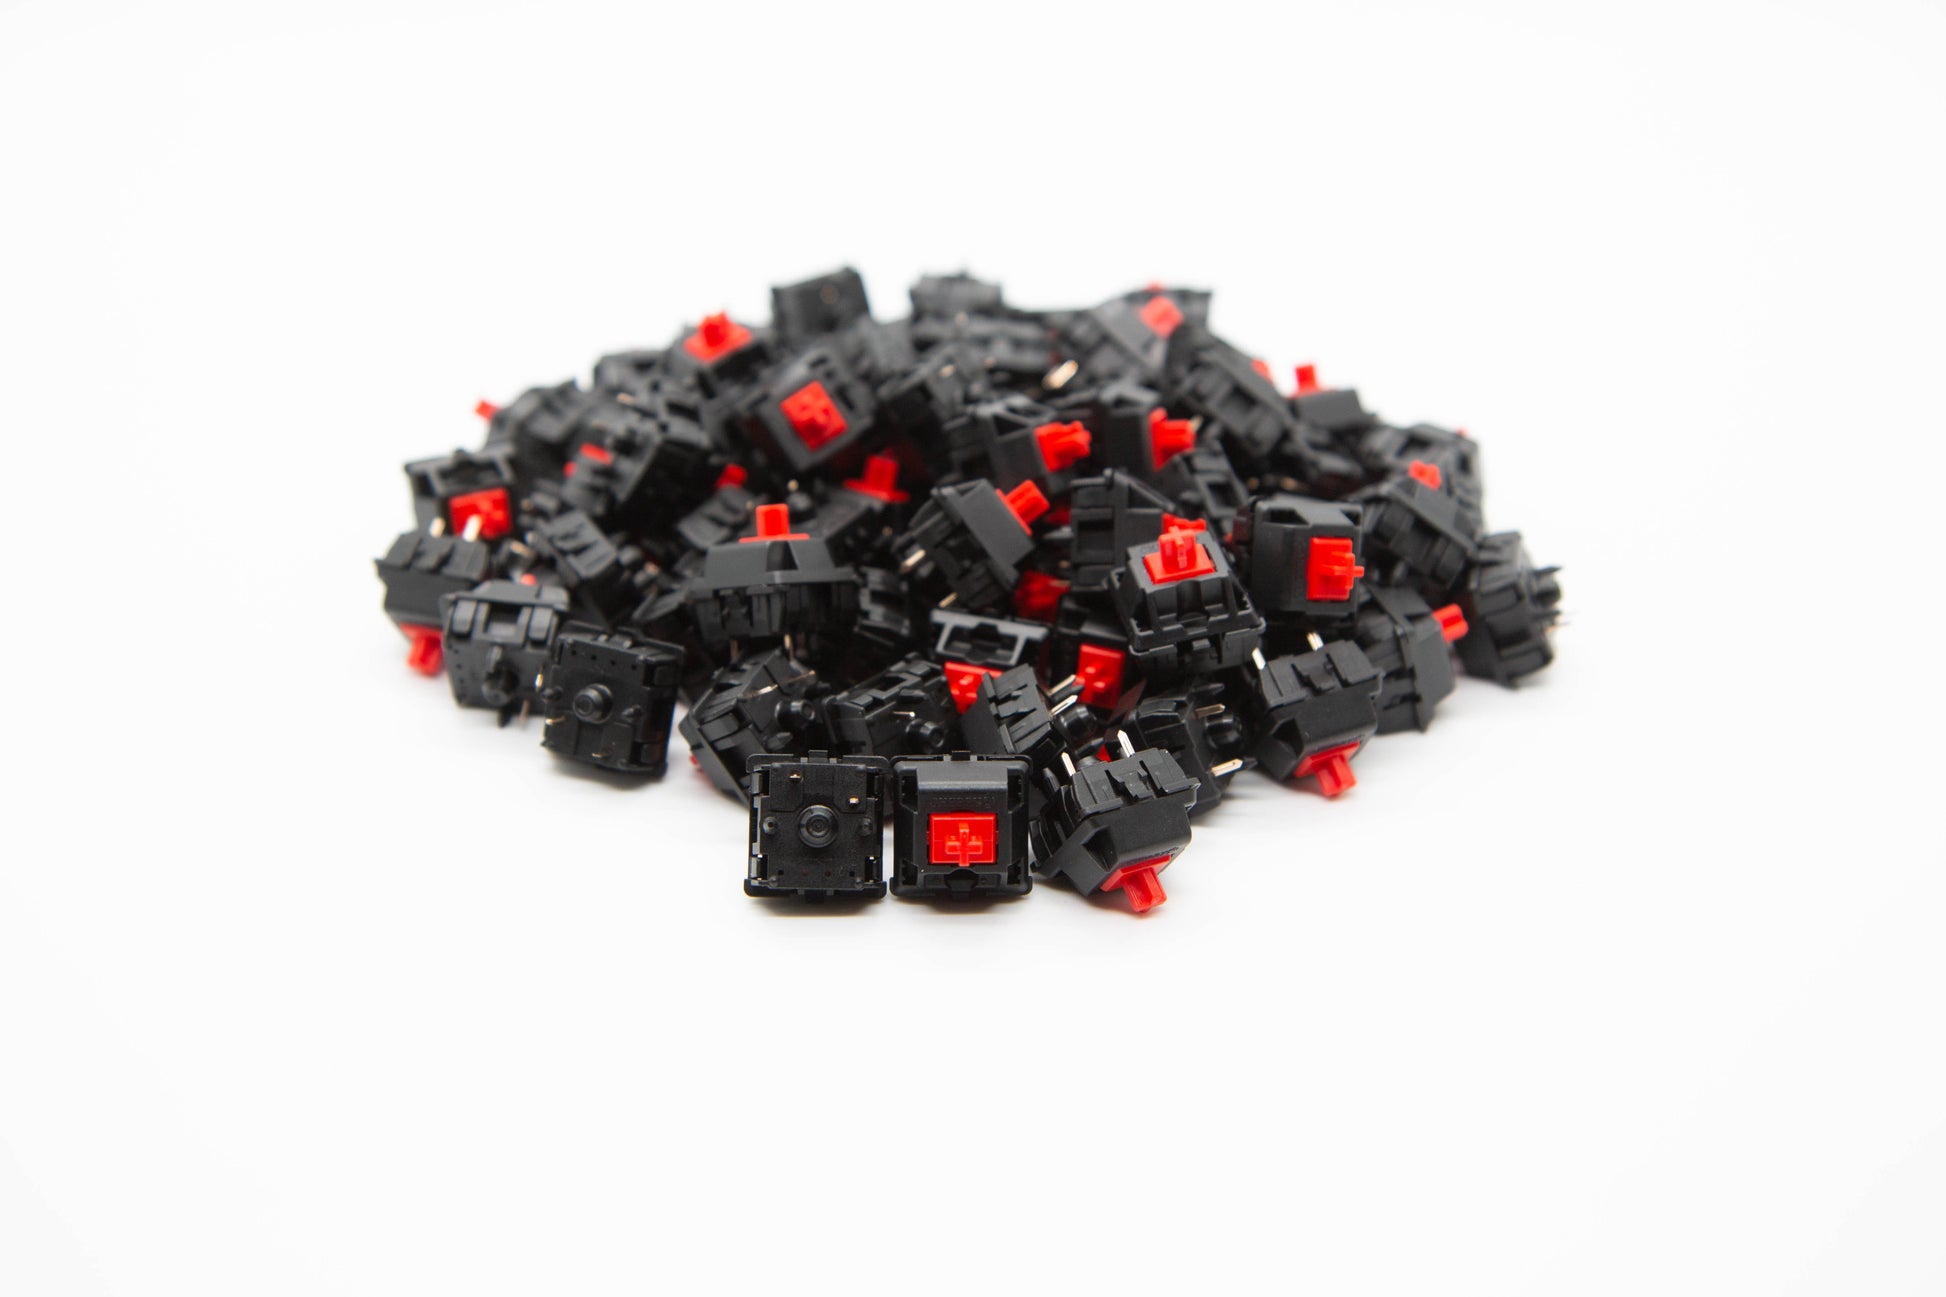 Close up shot of a pile of Cherry Hyperglide Red mechanical keyboard switches featuring black housing and red stems